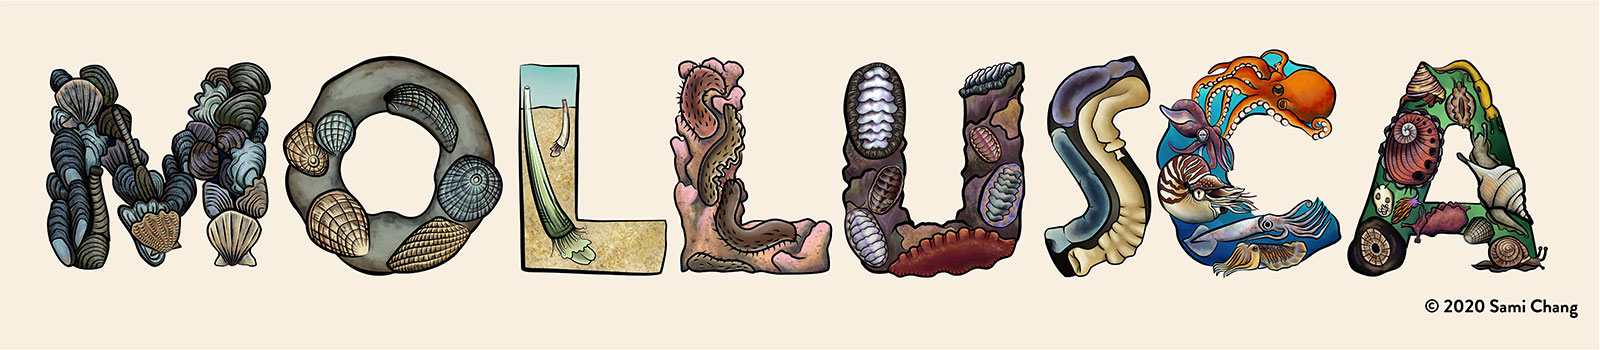 MOLLUSCA spelled out, each letter illustrated with a different mollusc group